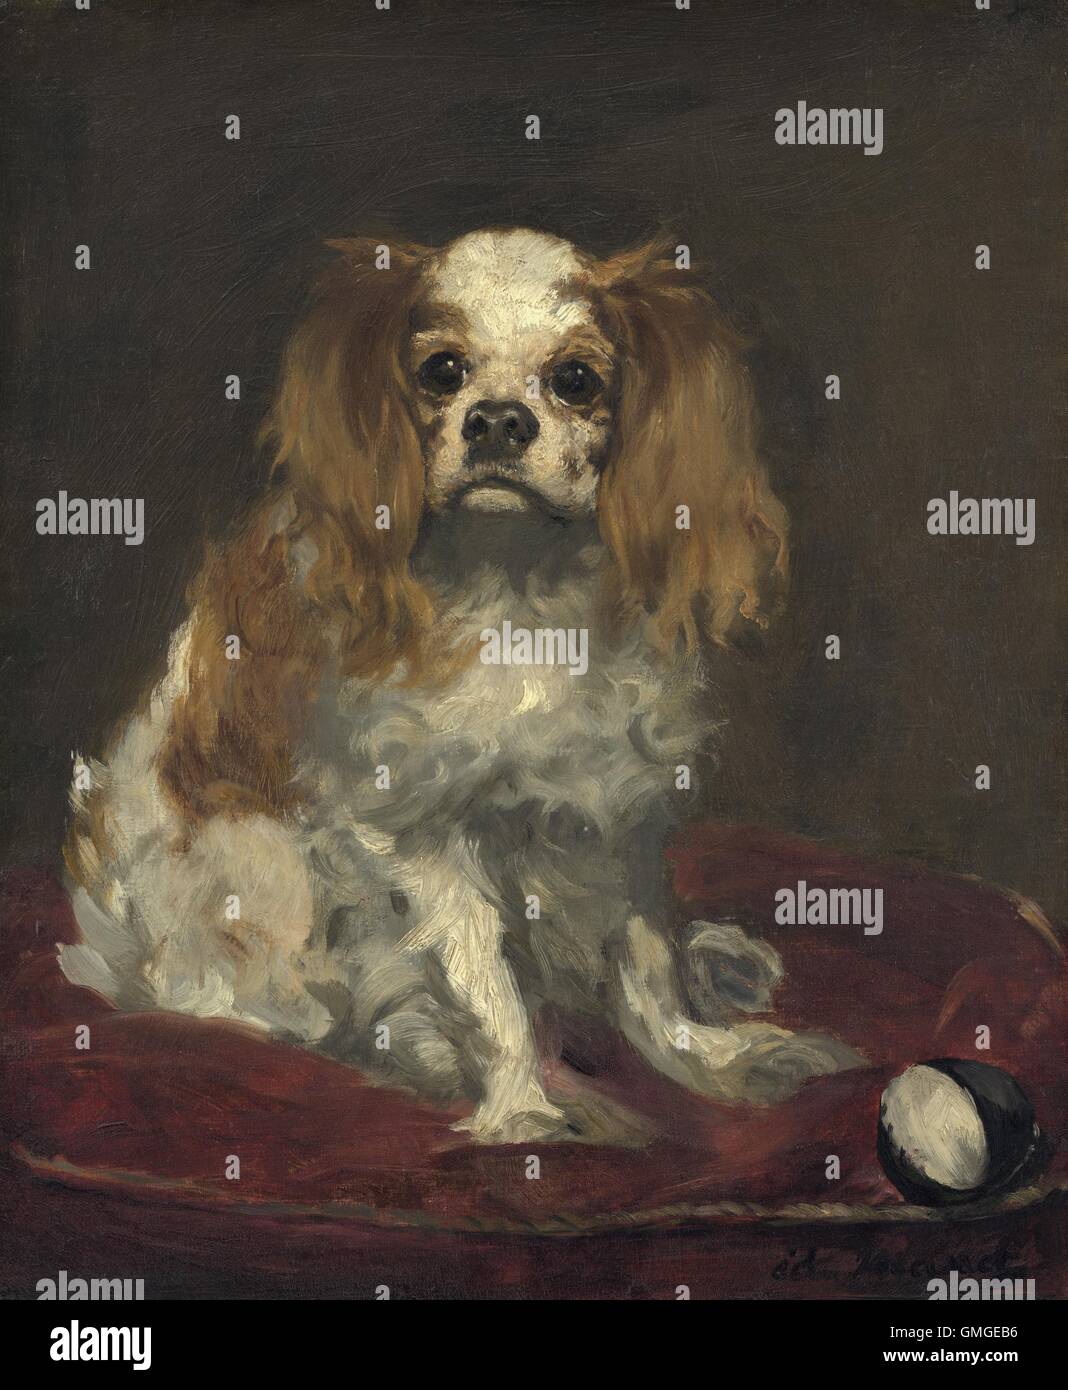 A King Charles Spaniel, by Edouard Manet, 1866, French painting, oil on linen (BSLOC_2016_5_99) Stock Photo